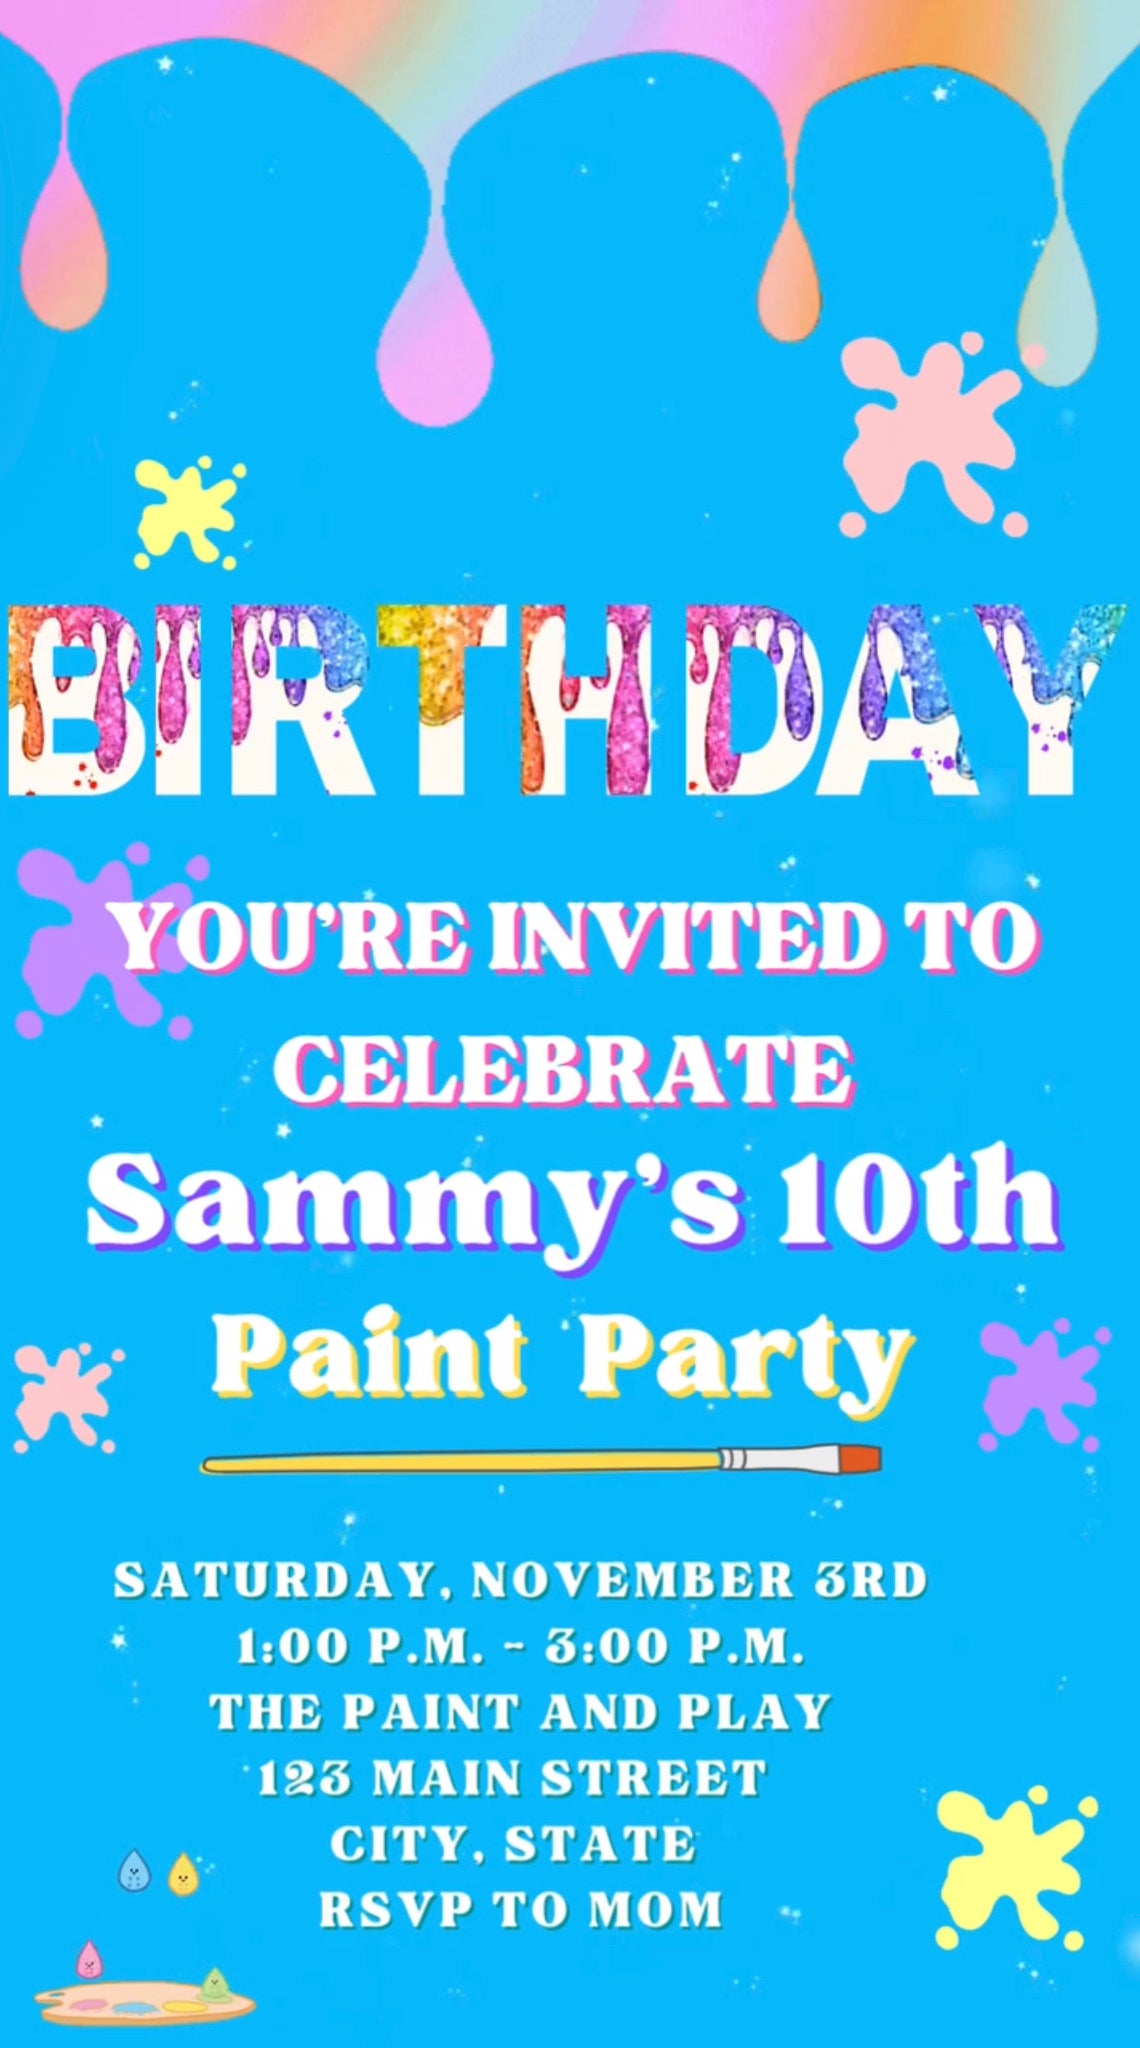 Paint Party Video invitation, Art birthday invitation, Sip and Painting Party